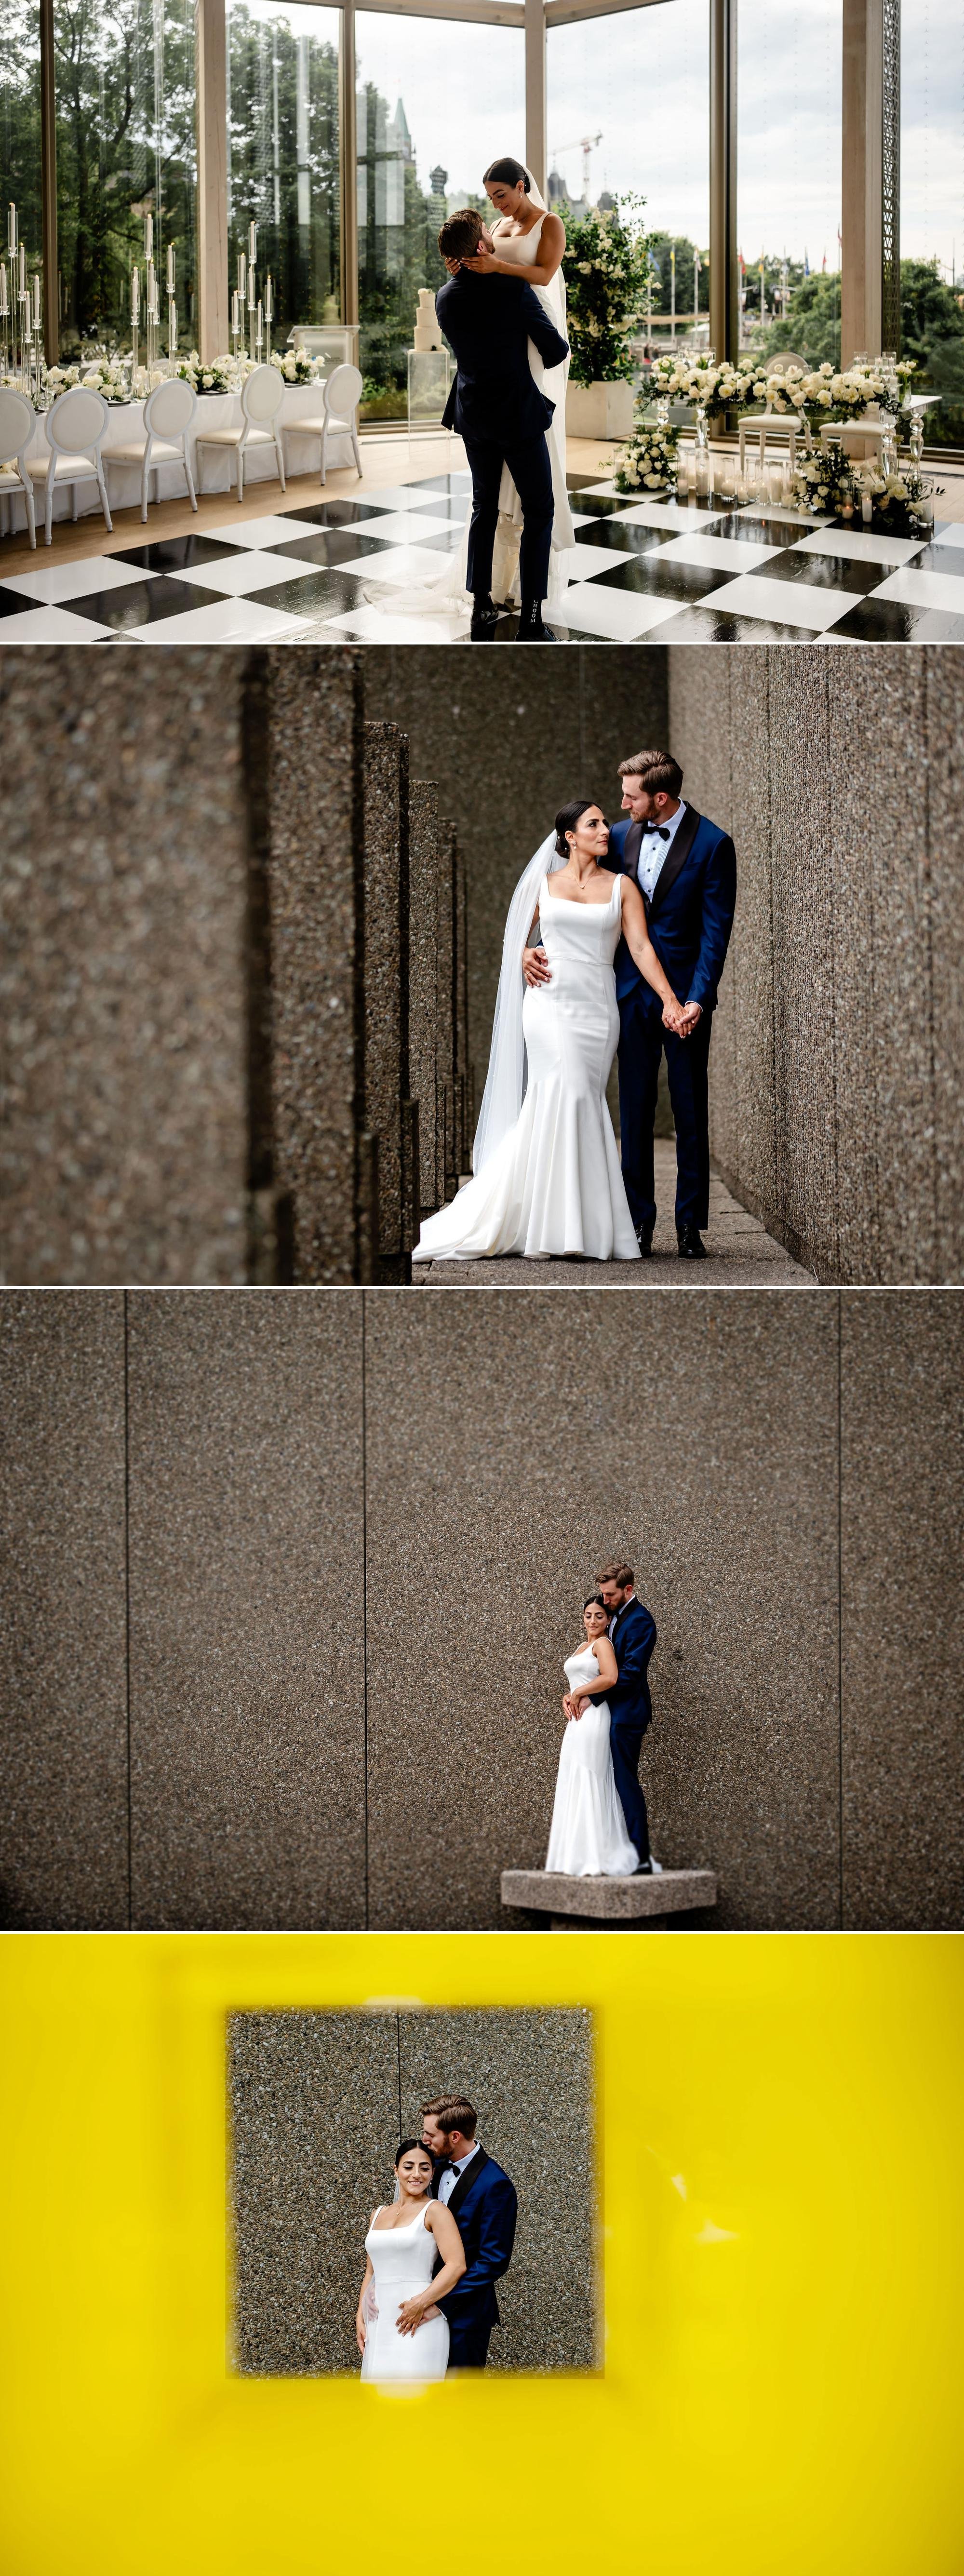 photos of a bride and groom at the national arts centre in ottawa